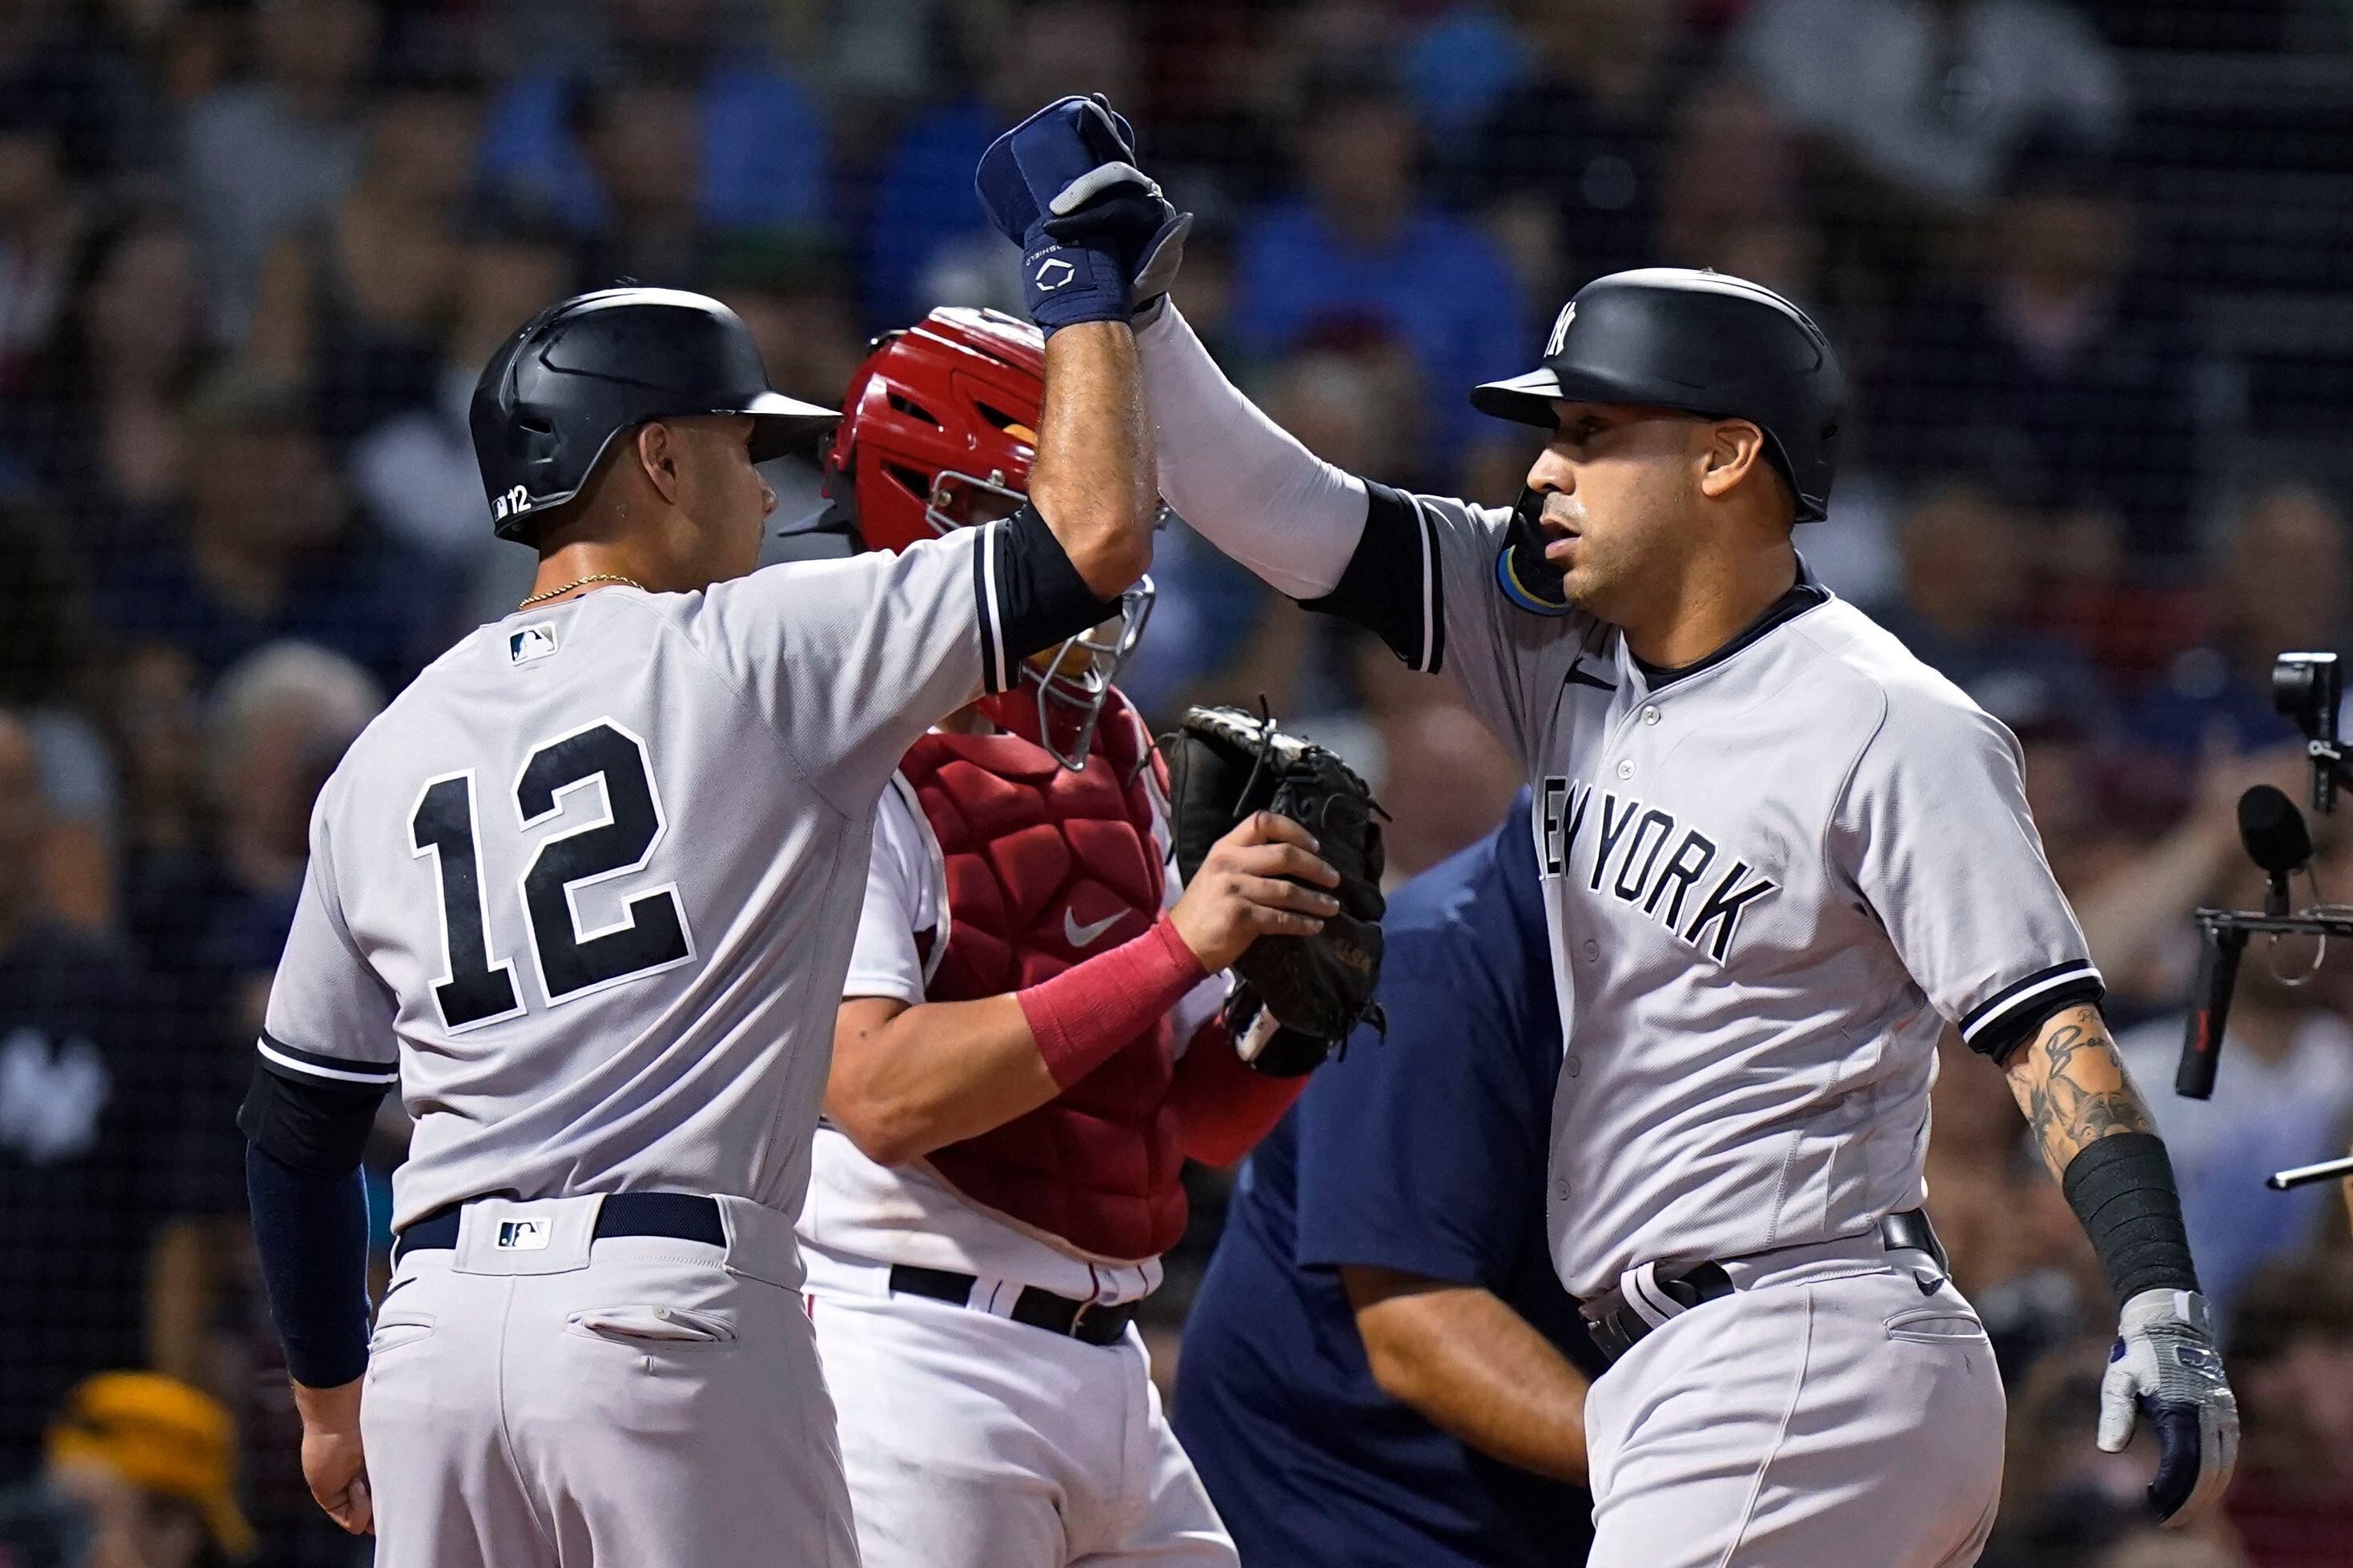 Judge homers twice to reach 57, Yanks beat Sox 7-6 in 10